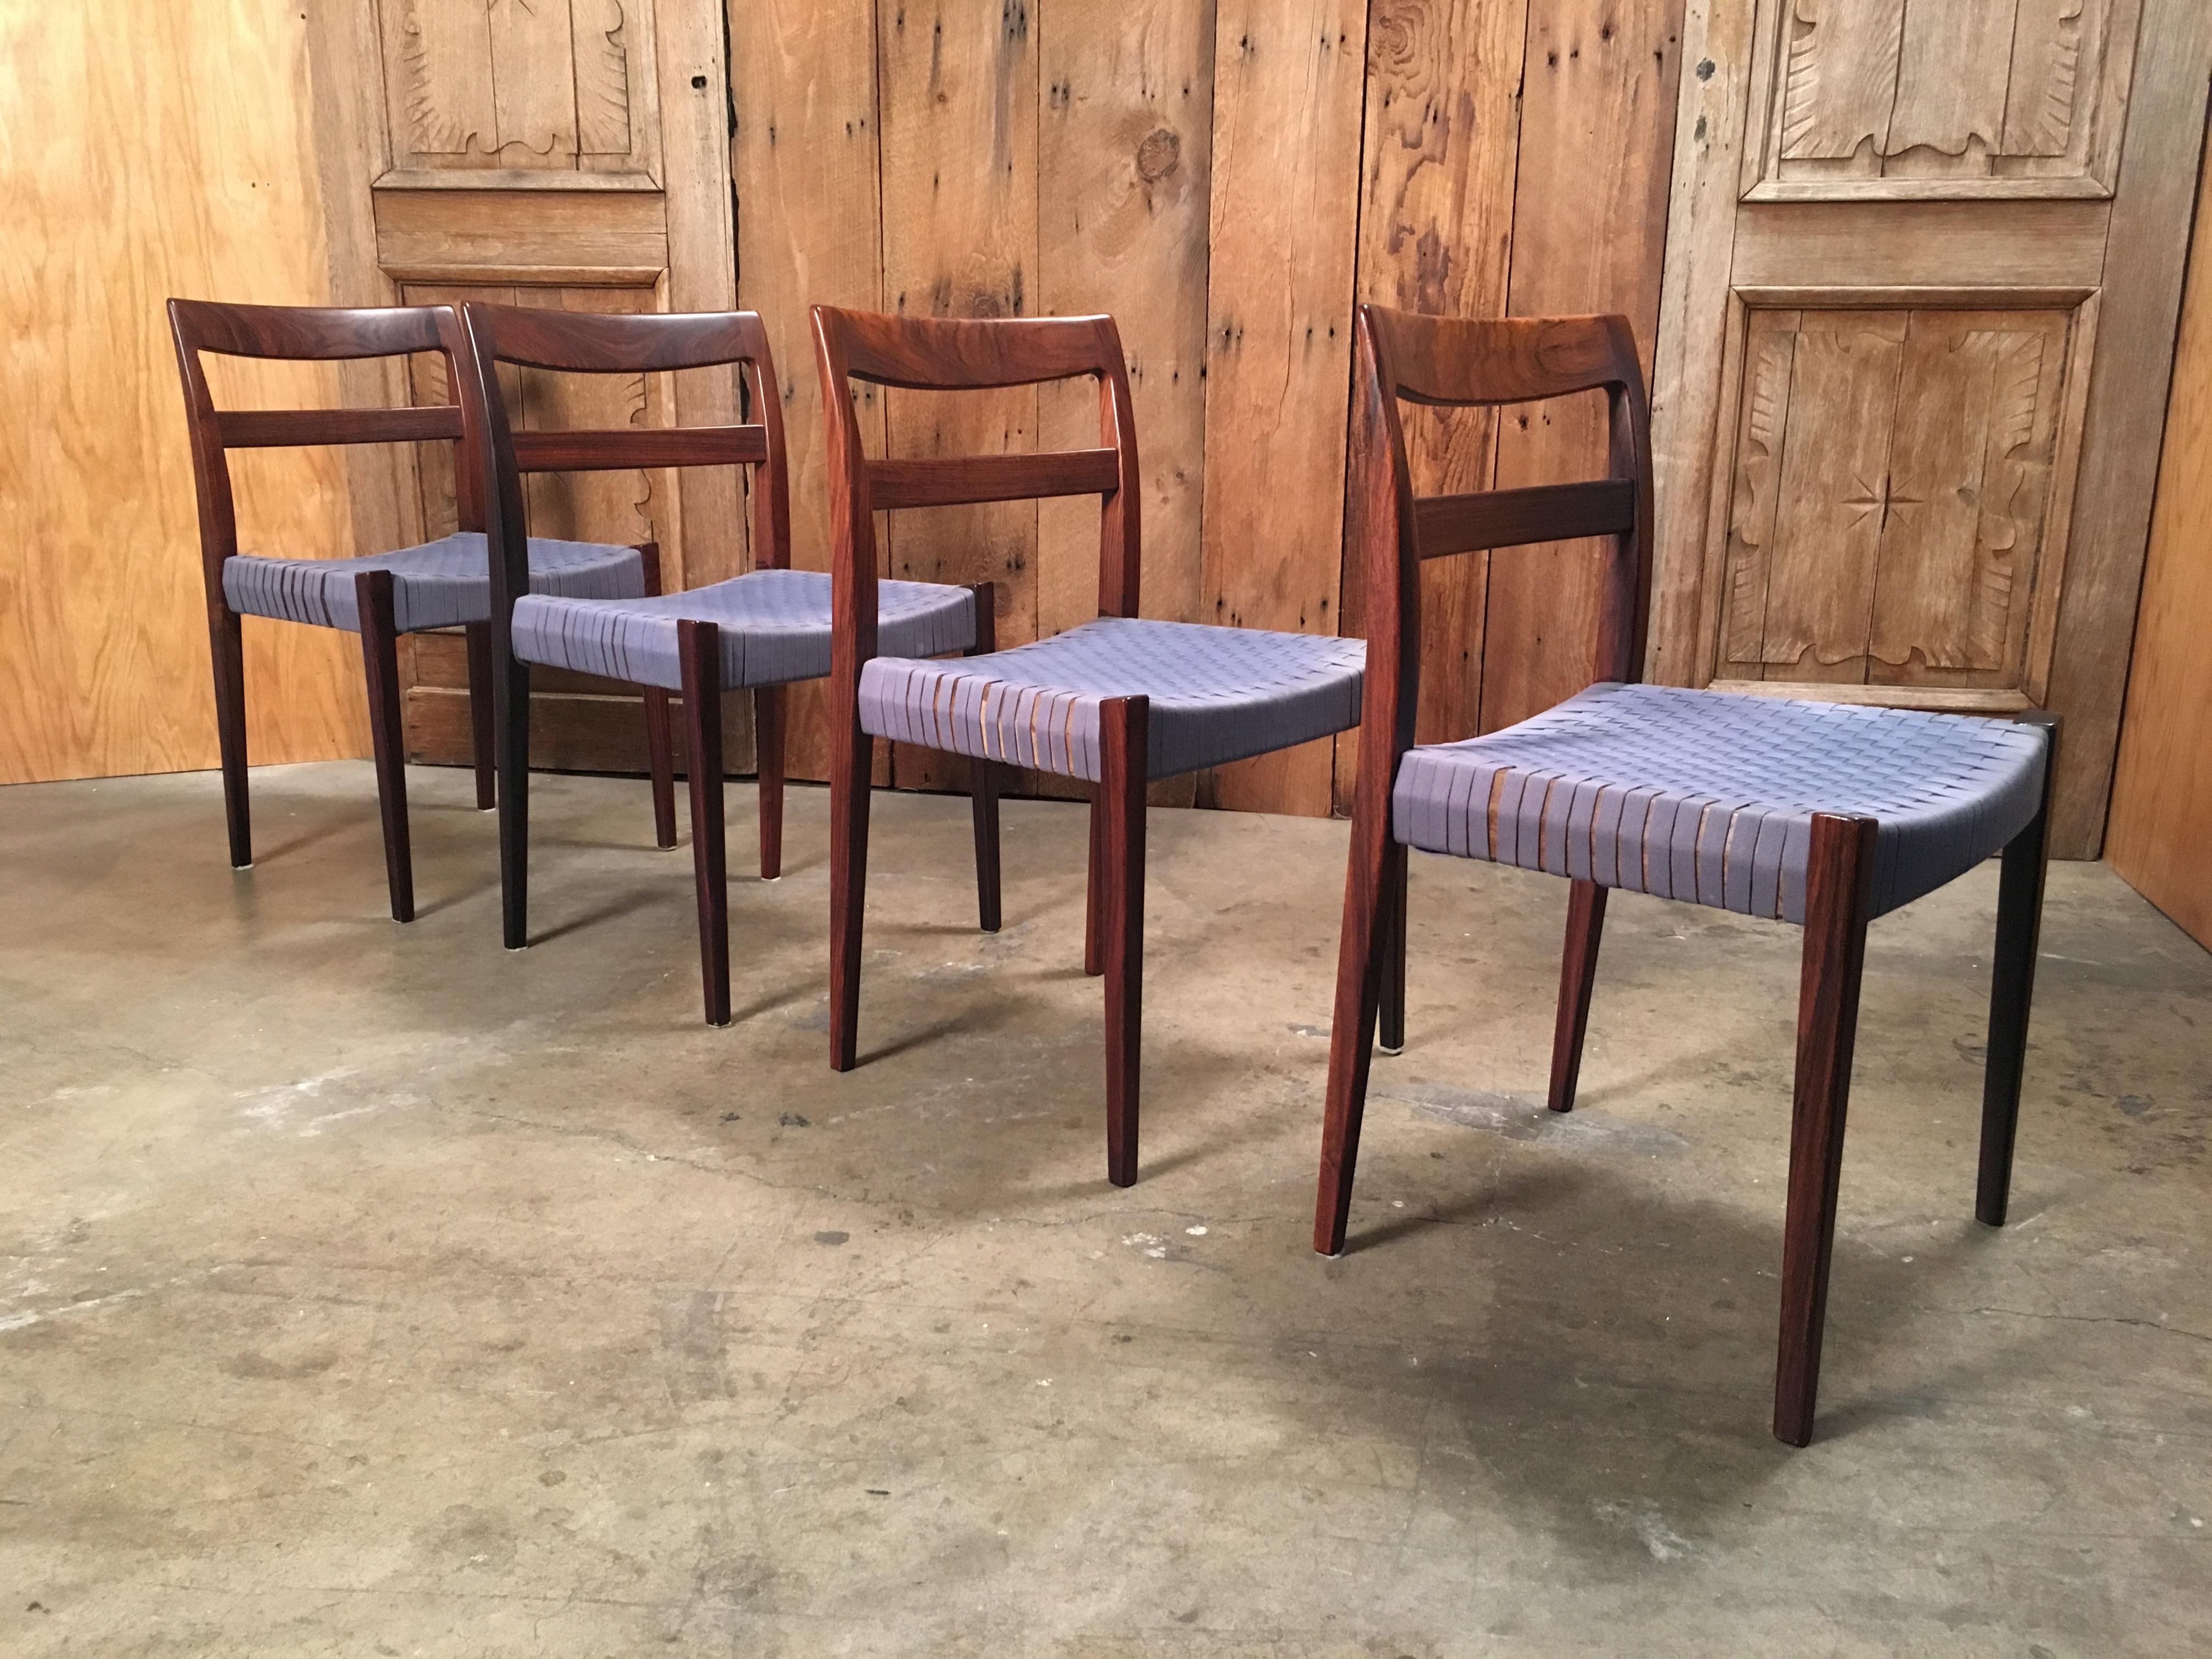 Set of four Mid-Century Modern dining chairs with woven web seats.